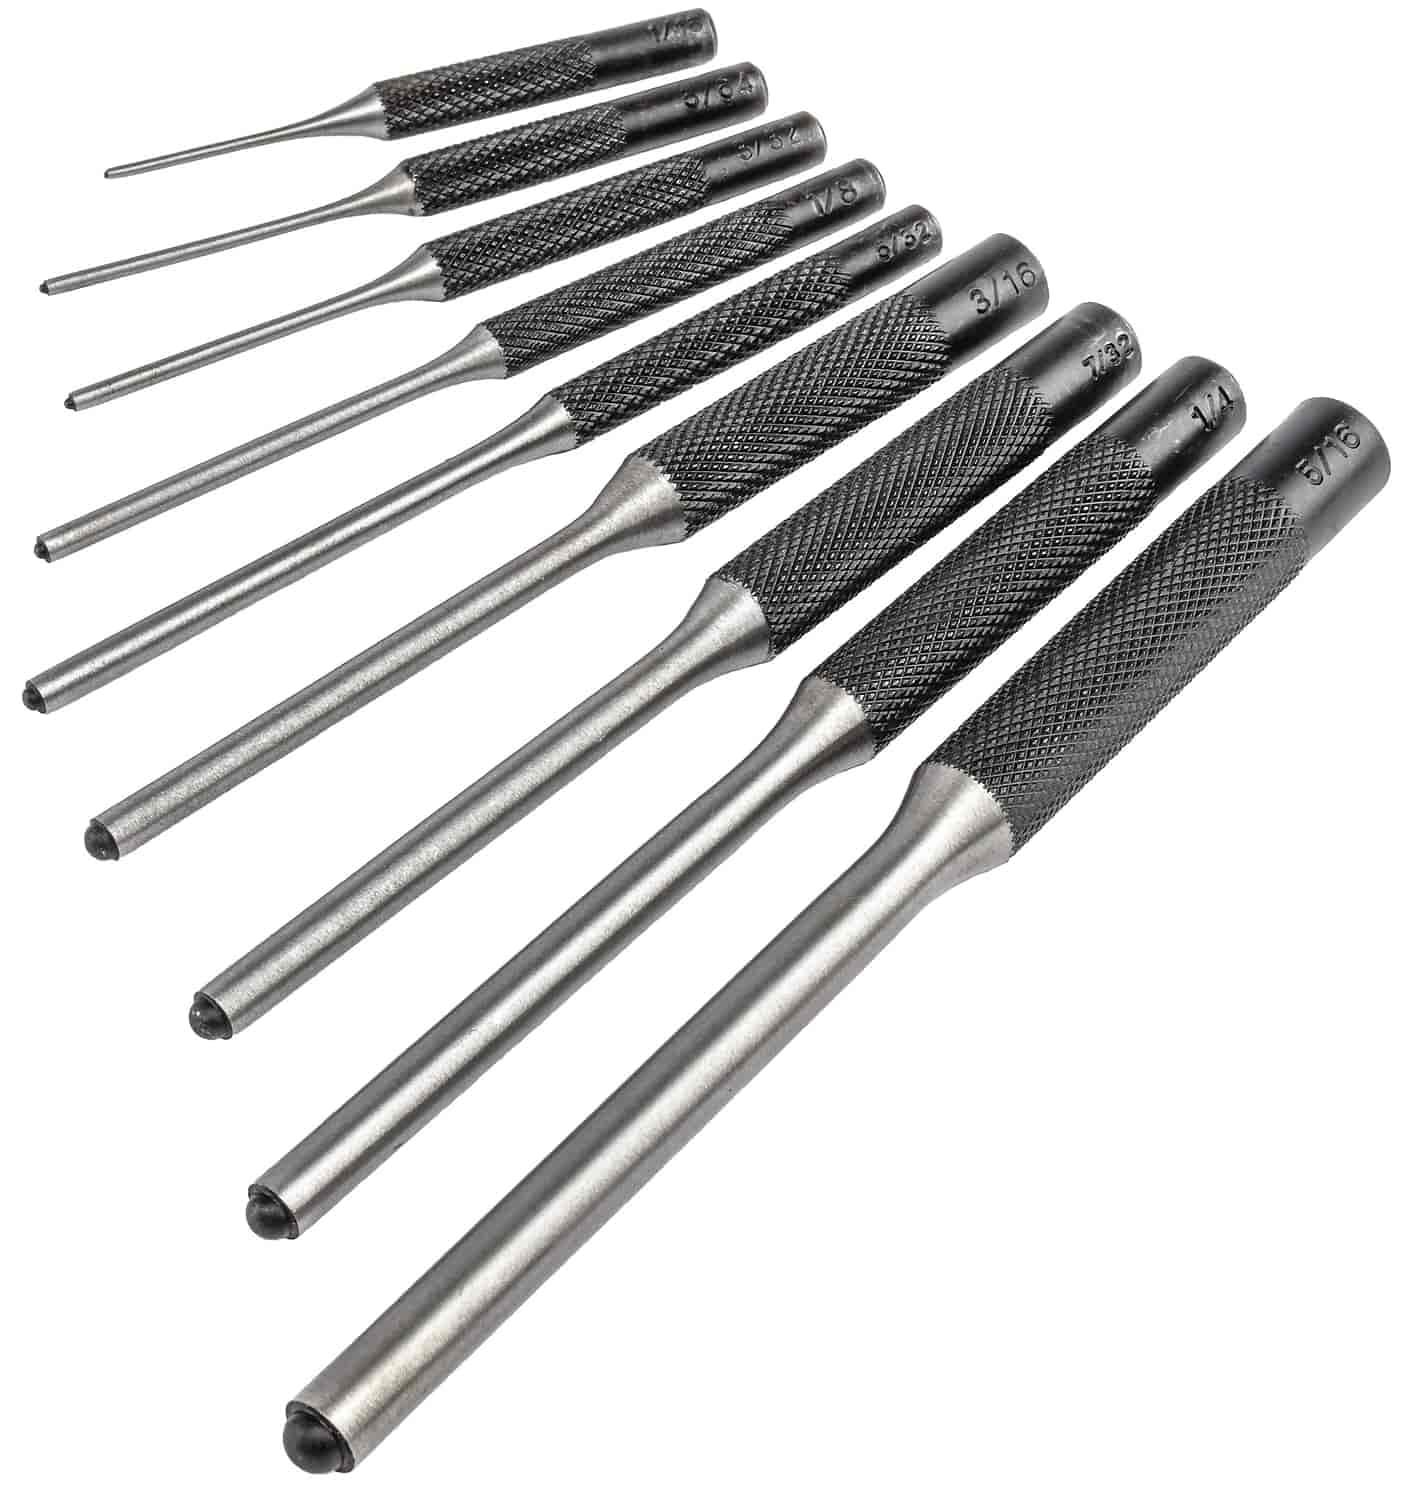 Roll Pin Punch Set | Buy 9 Piece Roll Pin Punch Sets with Punches Sizes:  1/16, 5/64 & More - JEGS